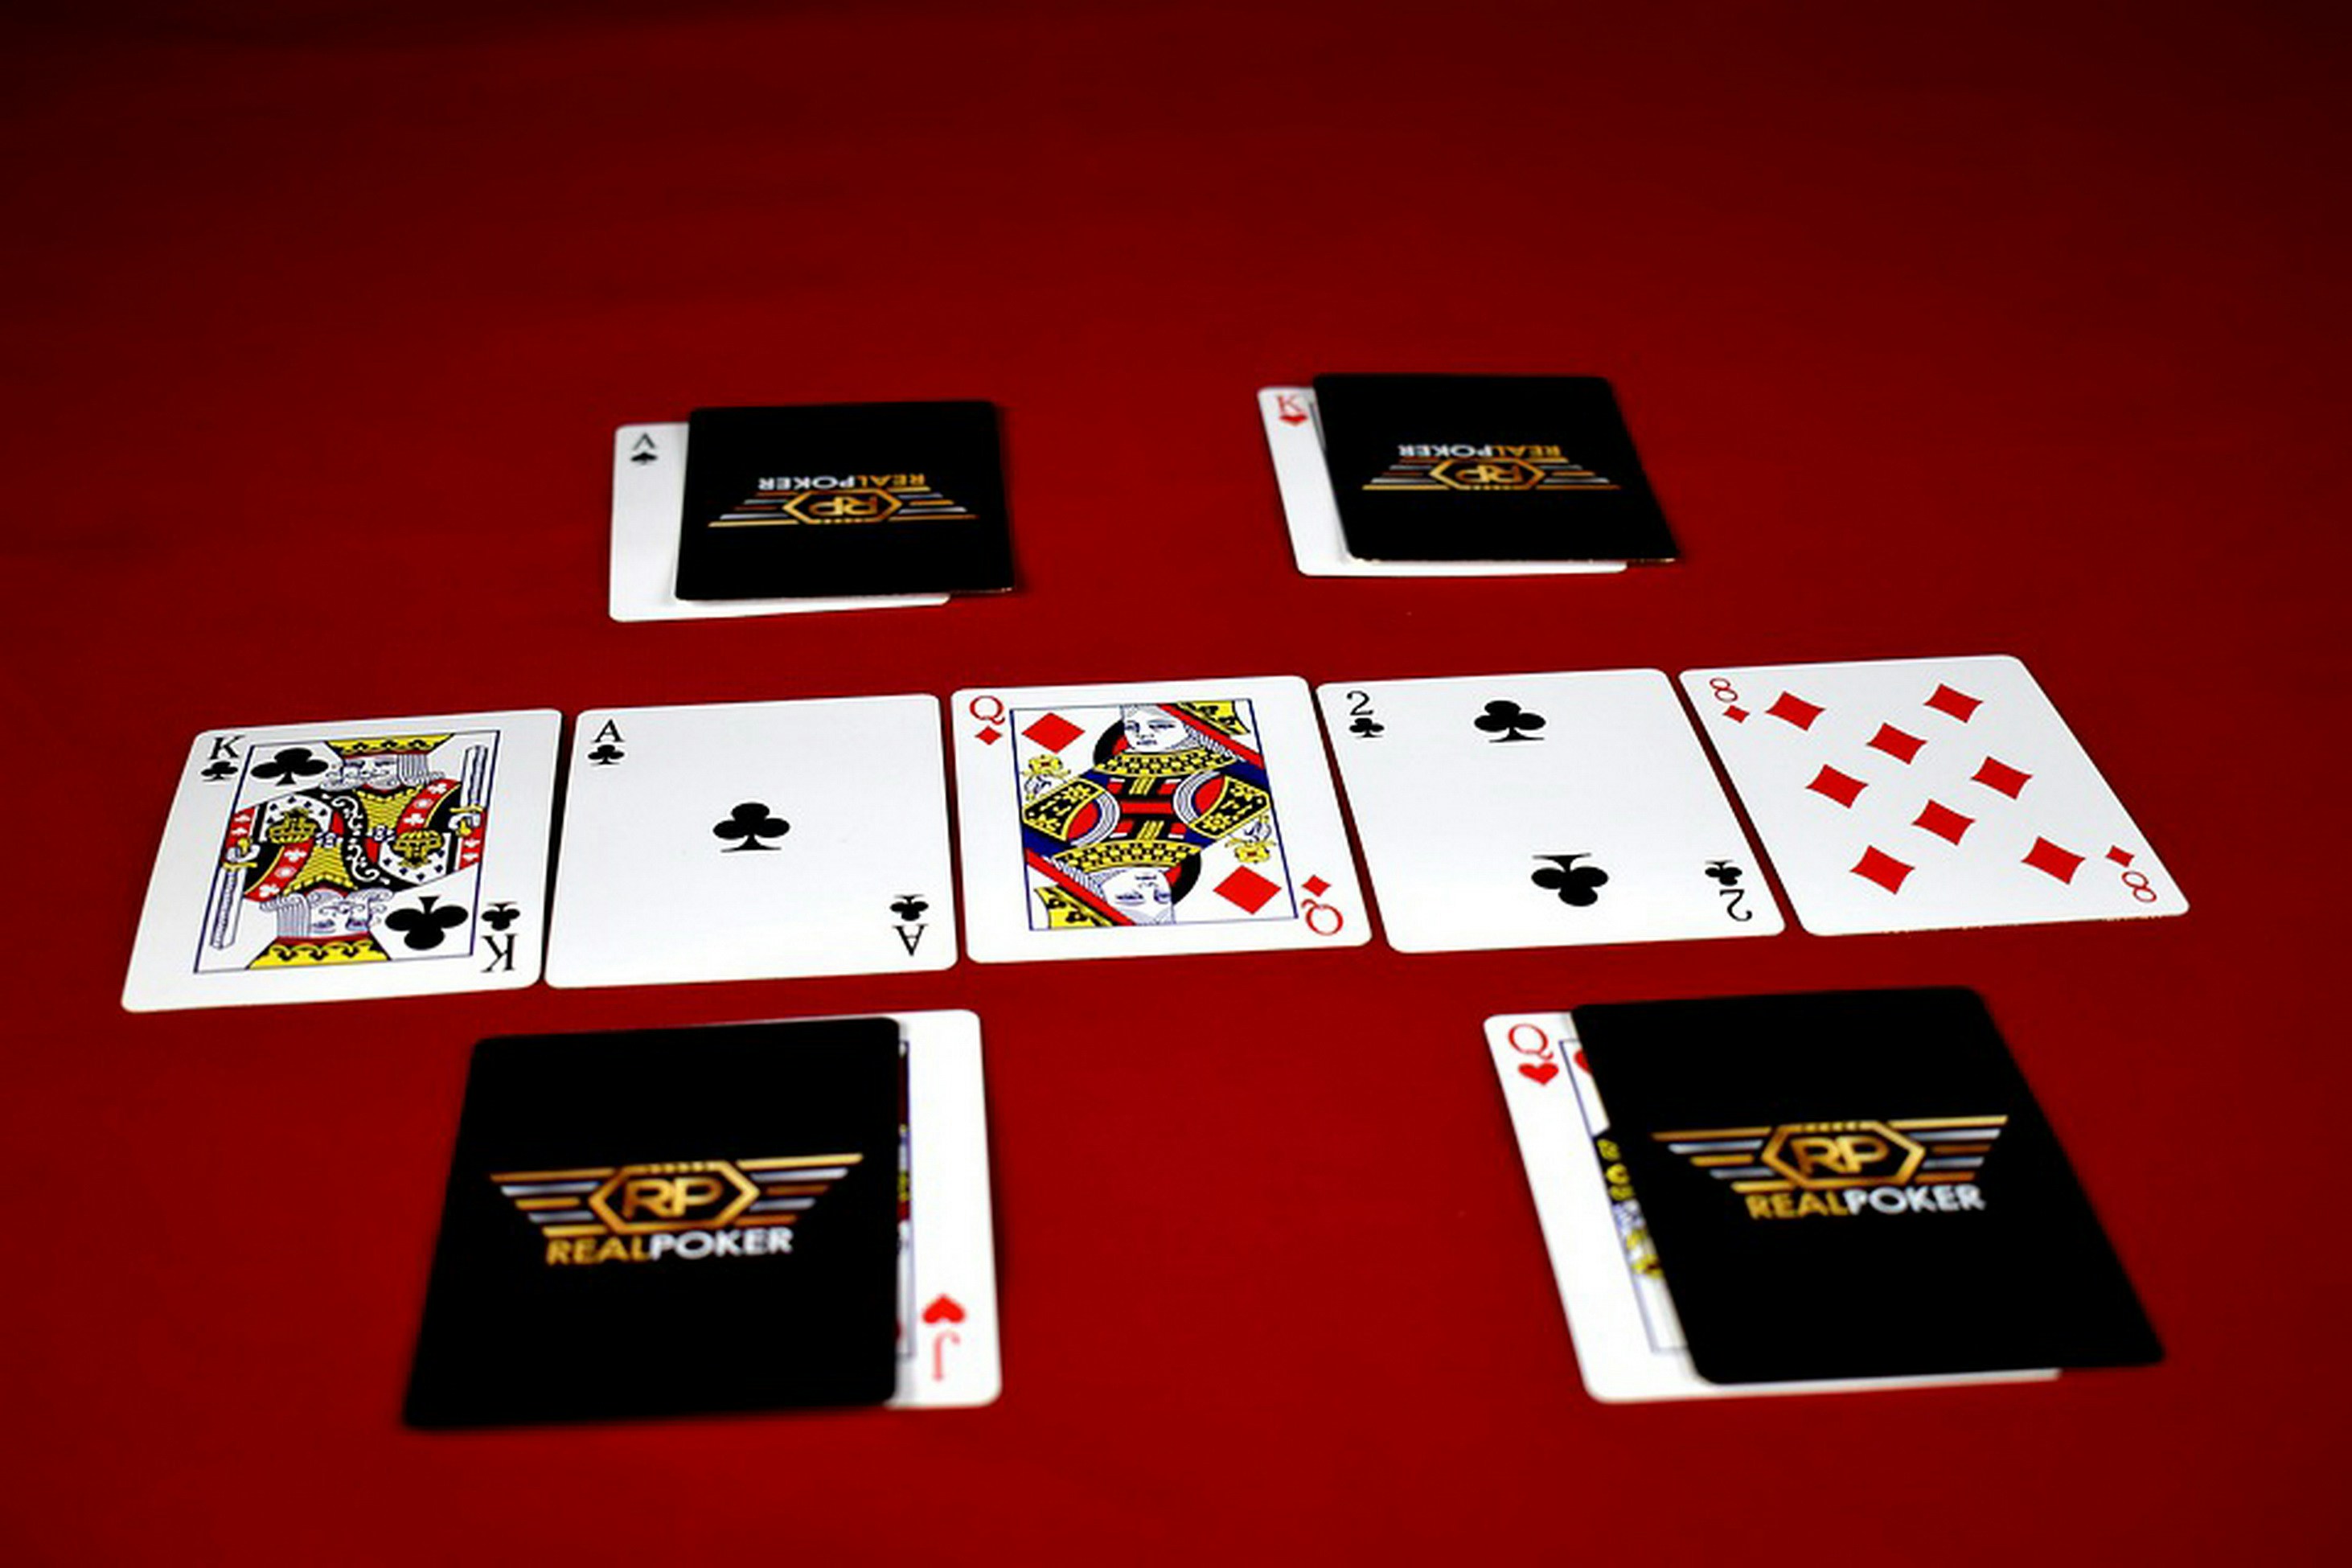 A very interesting game of poker between four poker players.